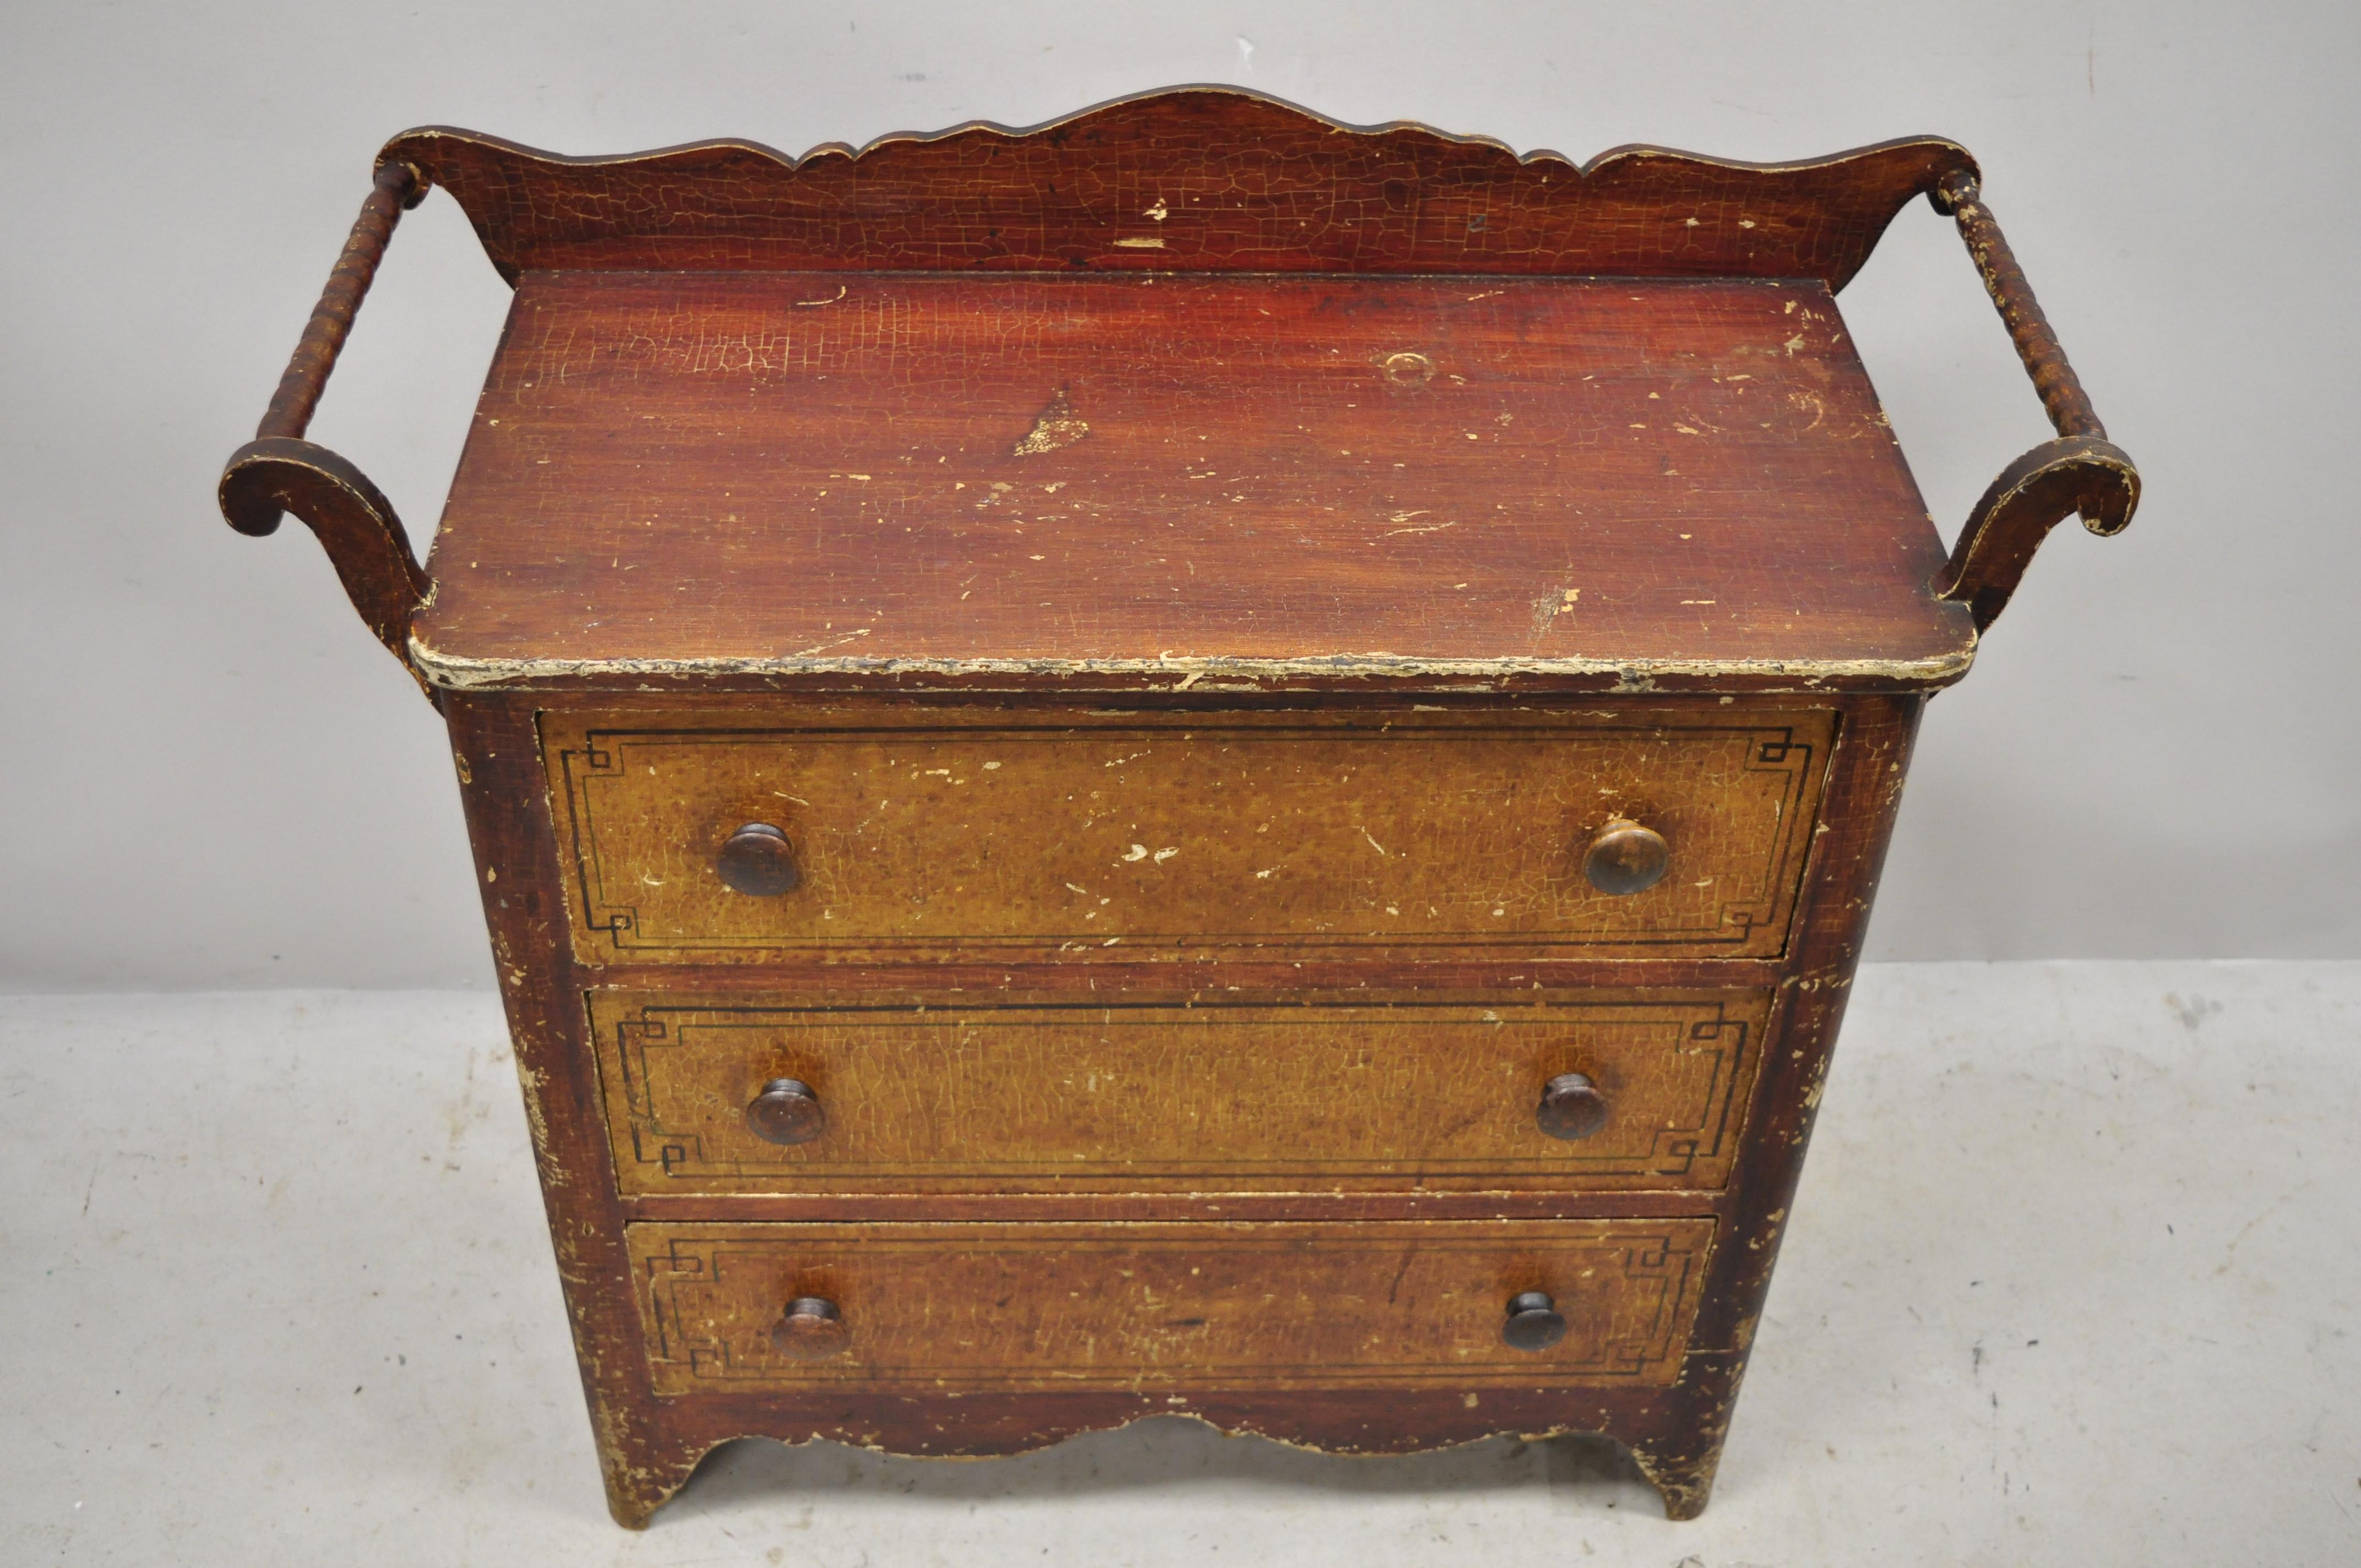 Antique American primitive colonial red distress polychrome painted 3-drawer washstand commode. Item features original distressed polychrome painted decorated finish, two towel bars, backsplash, wood construction, 3 drawers, very nice antique item,